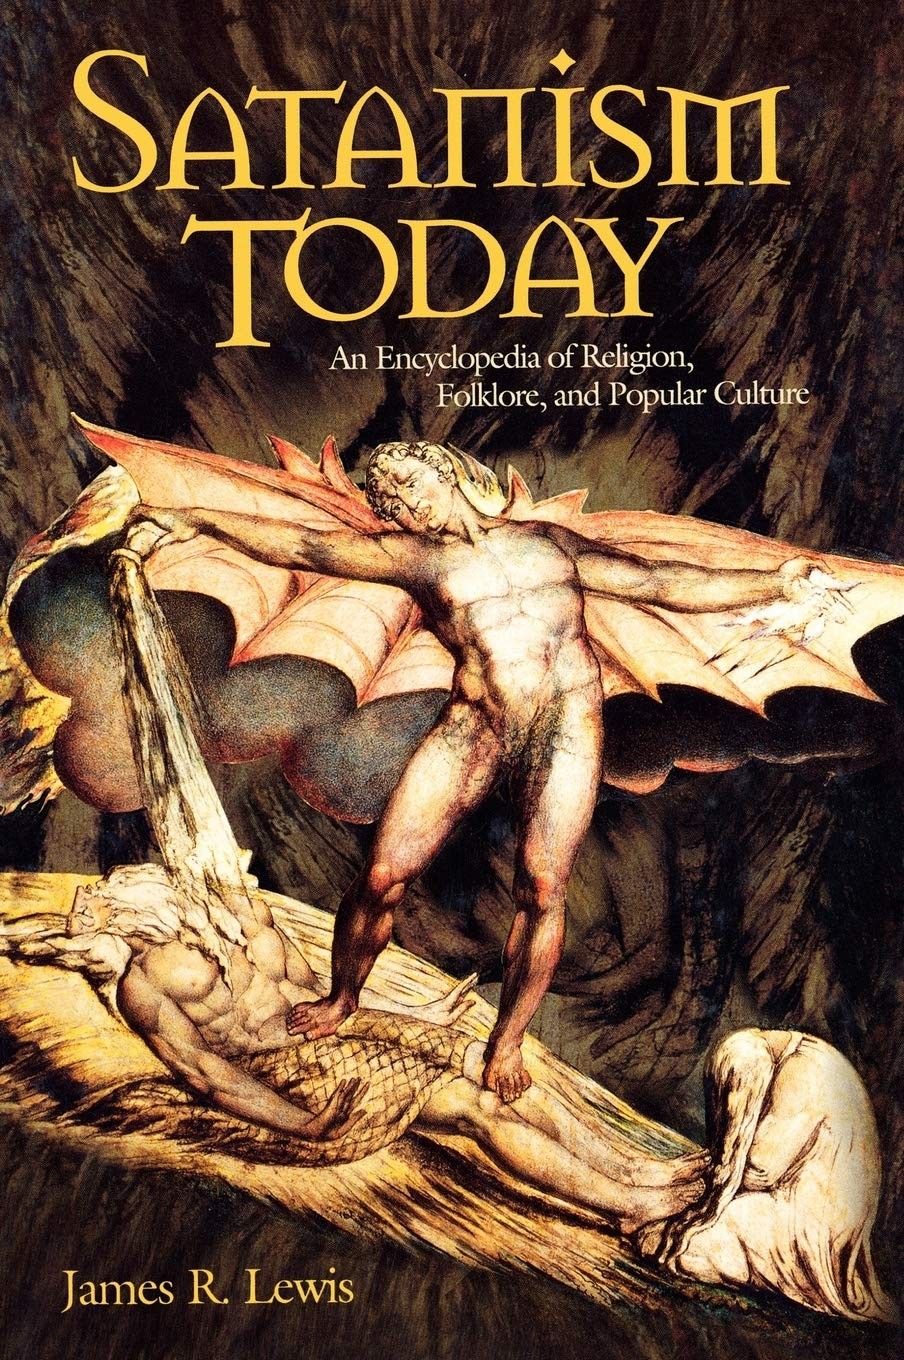 Satanism Today: An Encyclopedia of Religion, Folklore, and Popular Culture